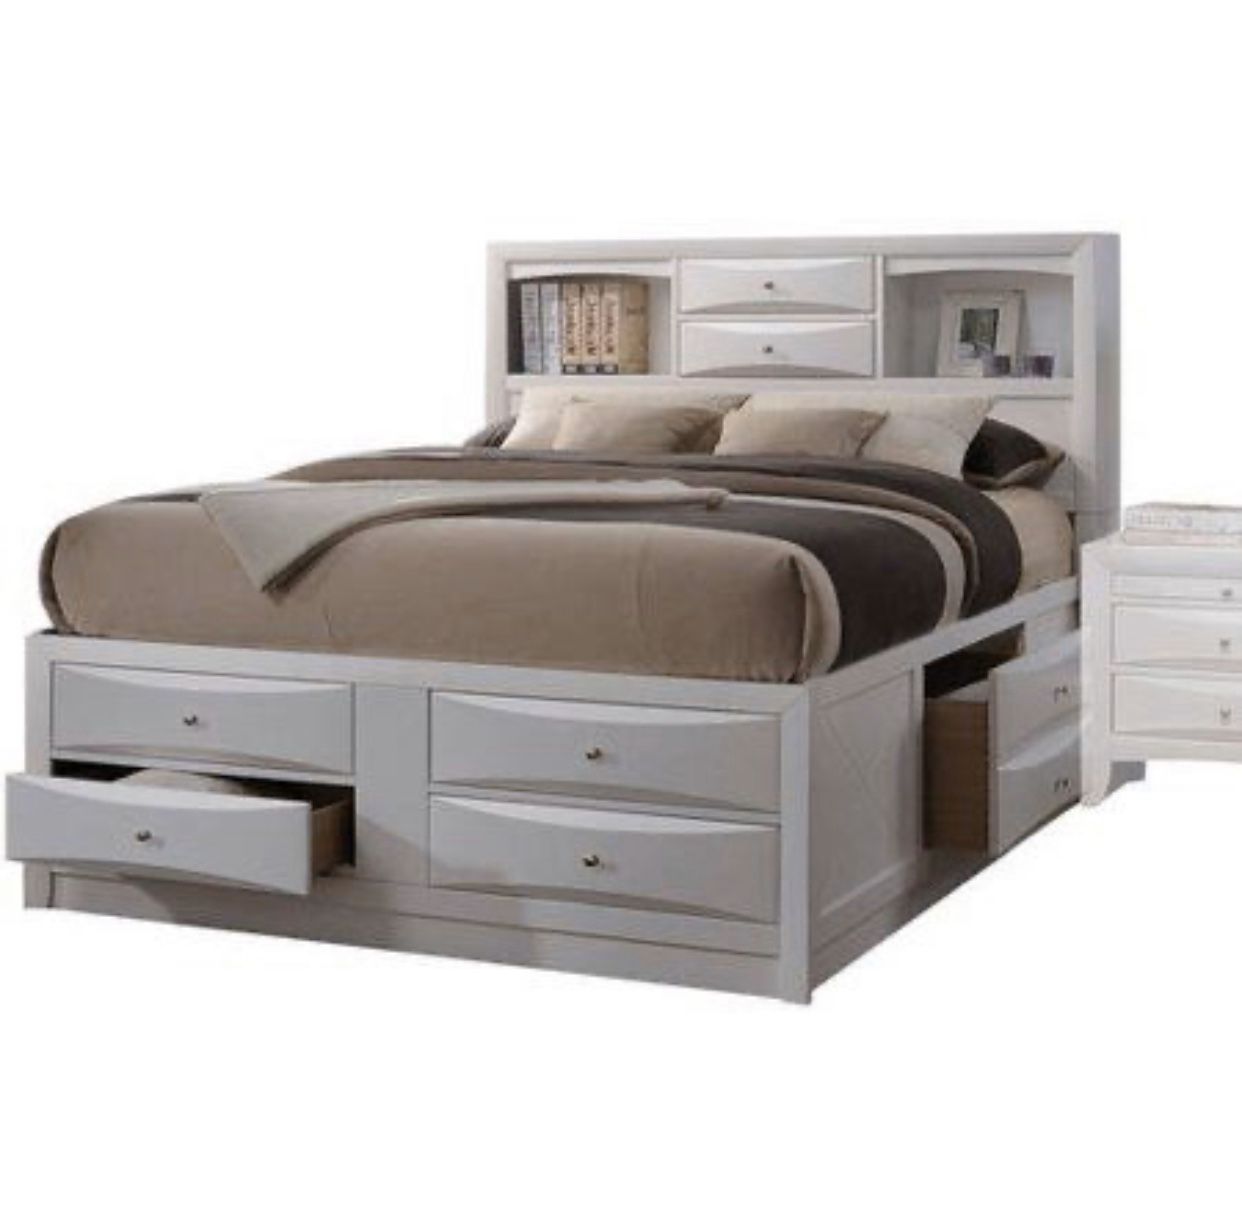 Acme Ireland Queen Bed with Storage only, White